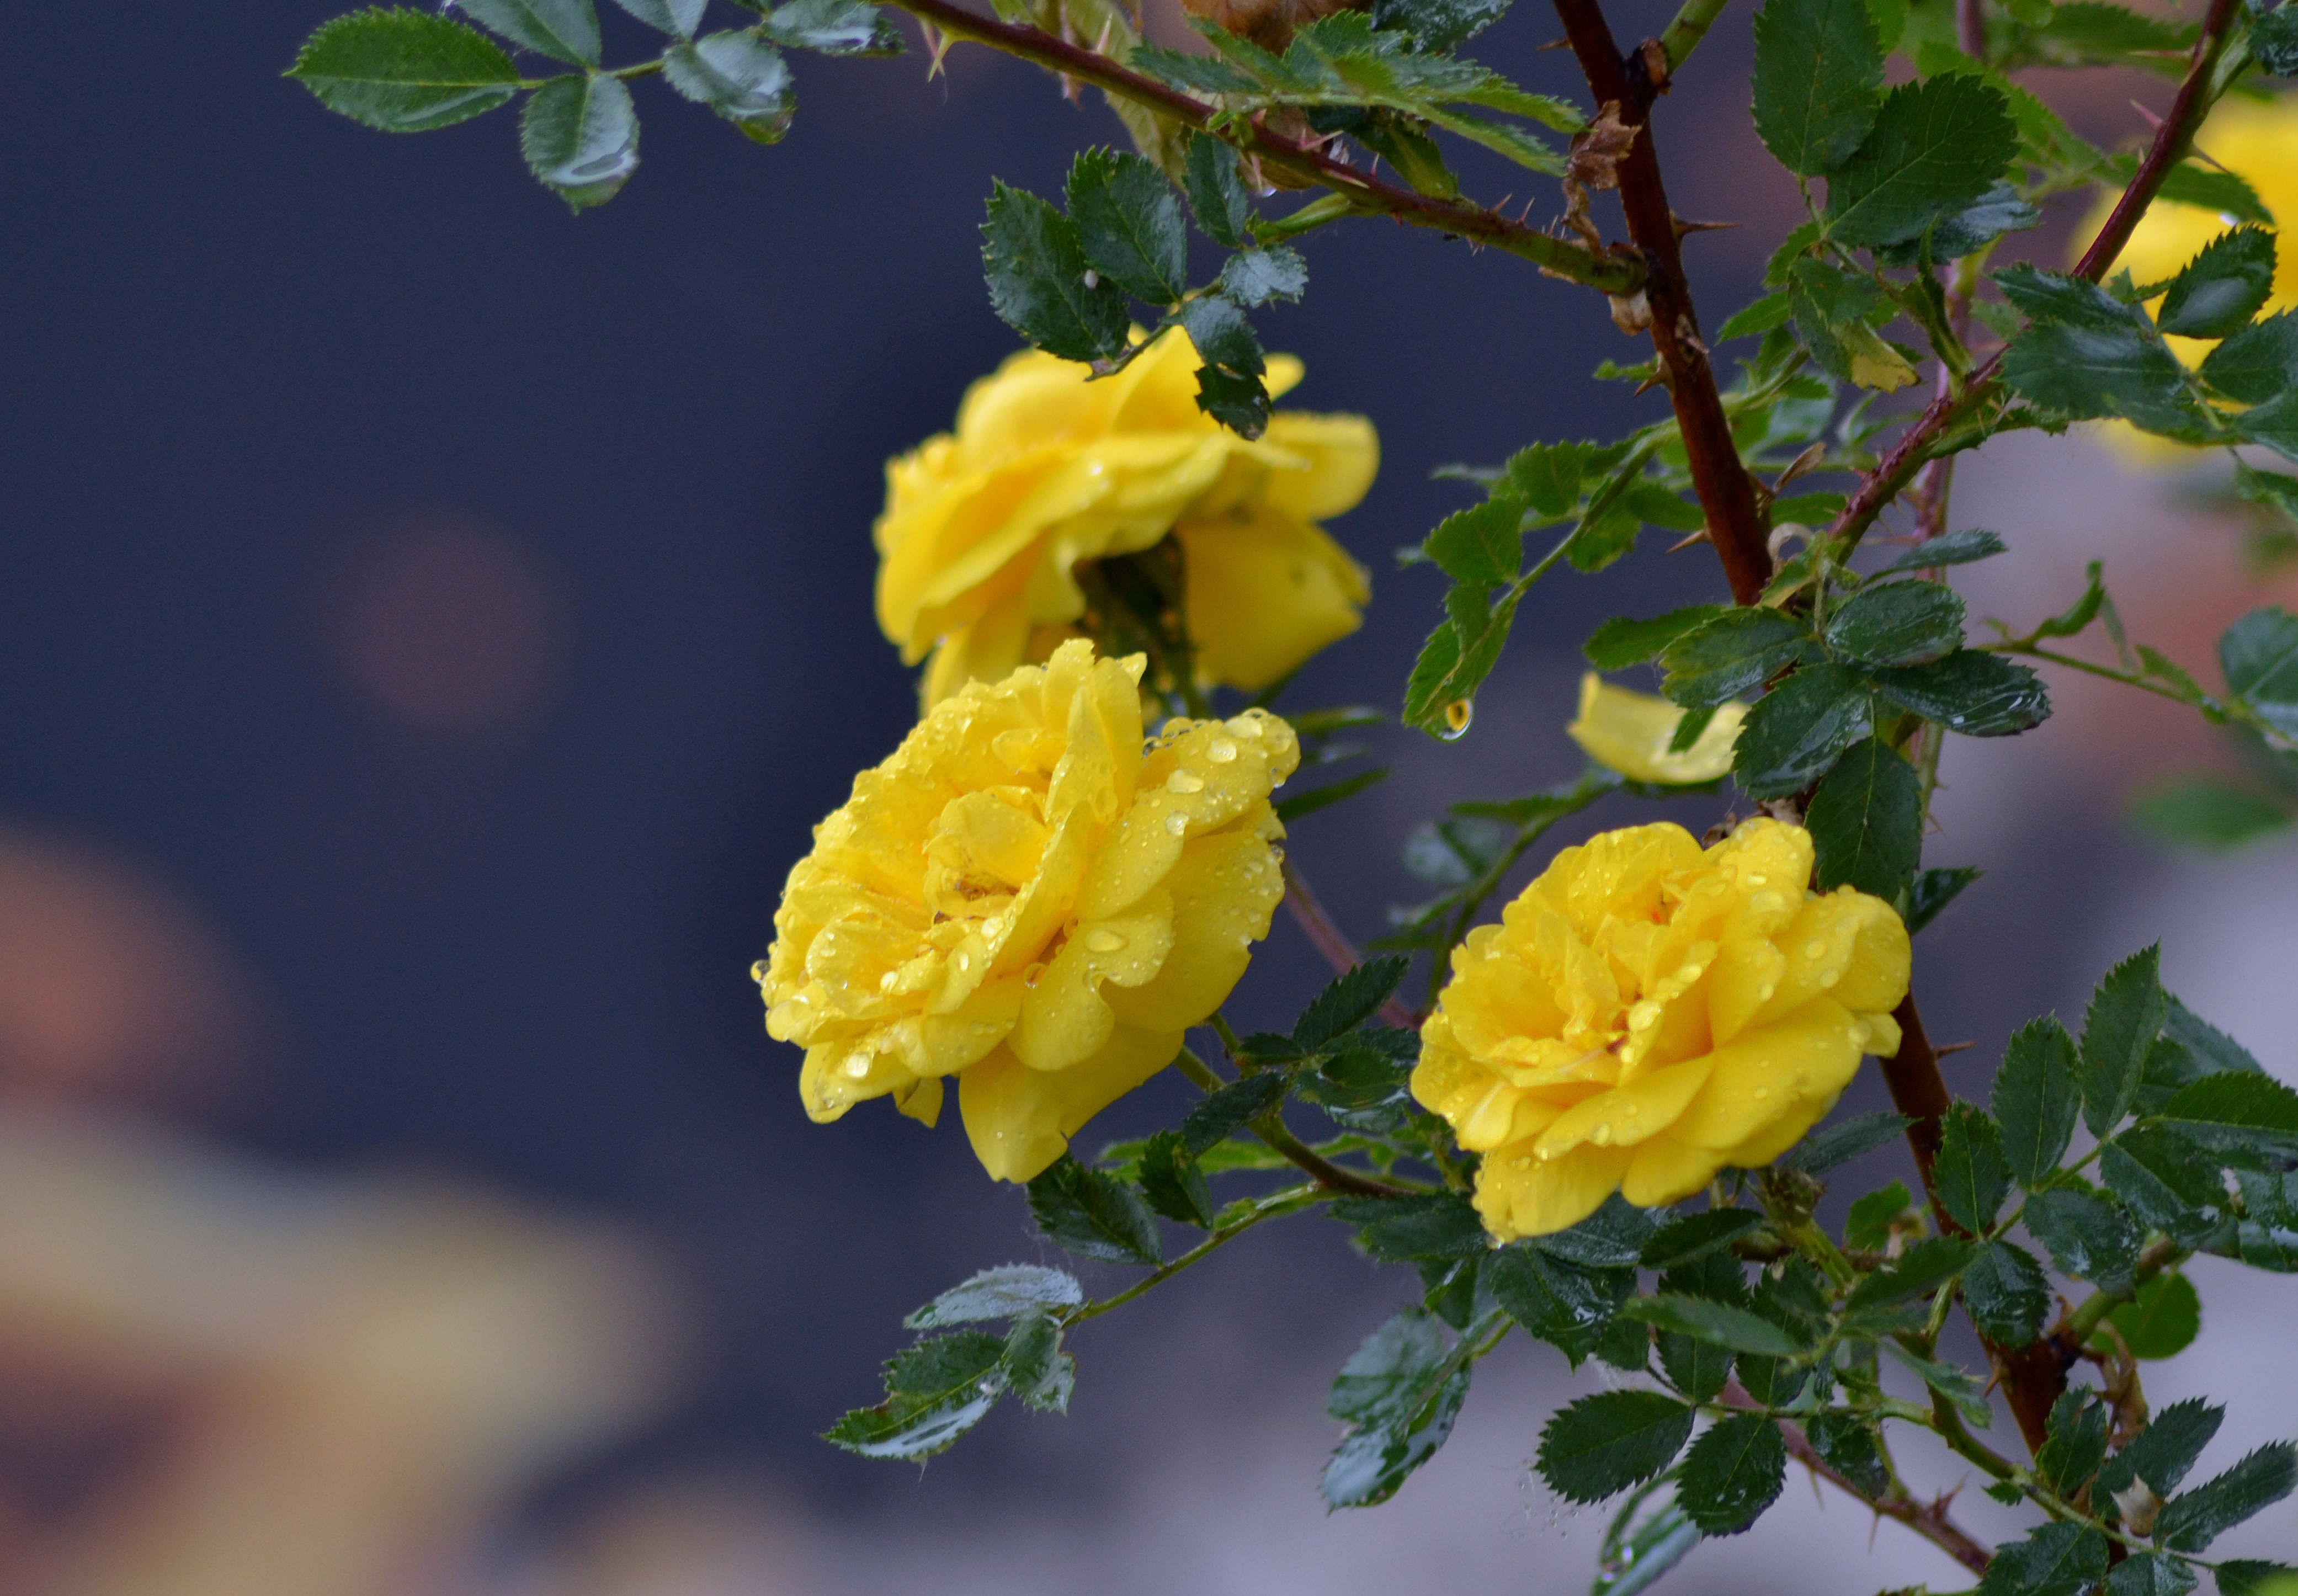 Download PC Wallpaper roses, flowers, drops, branch, yellow roses